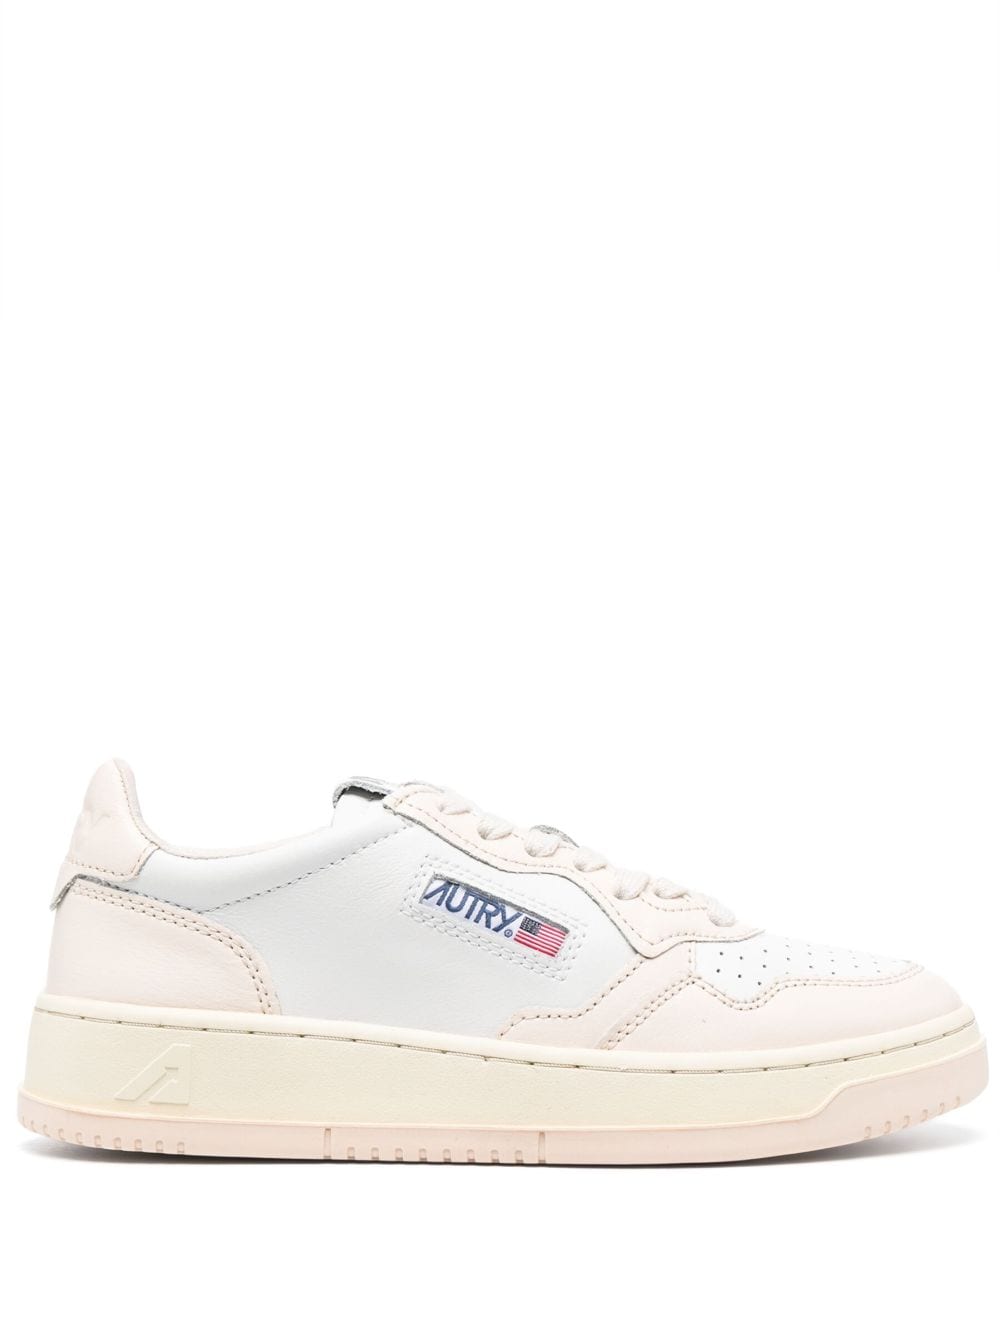 Autry panelled perforated leather sneakers - White von Autry